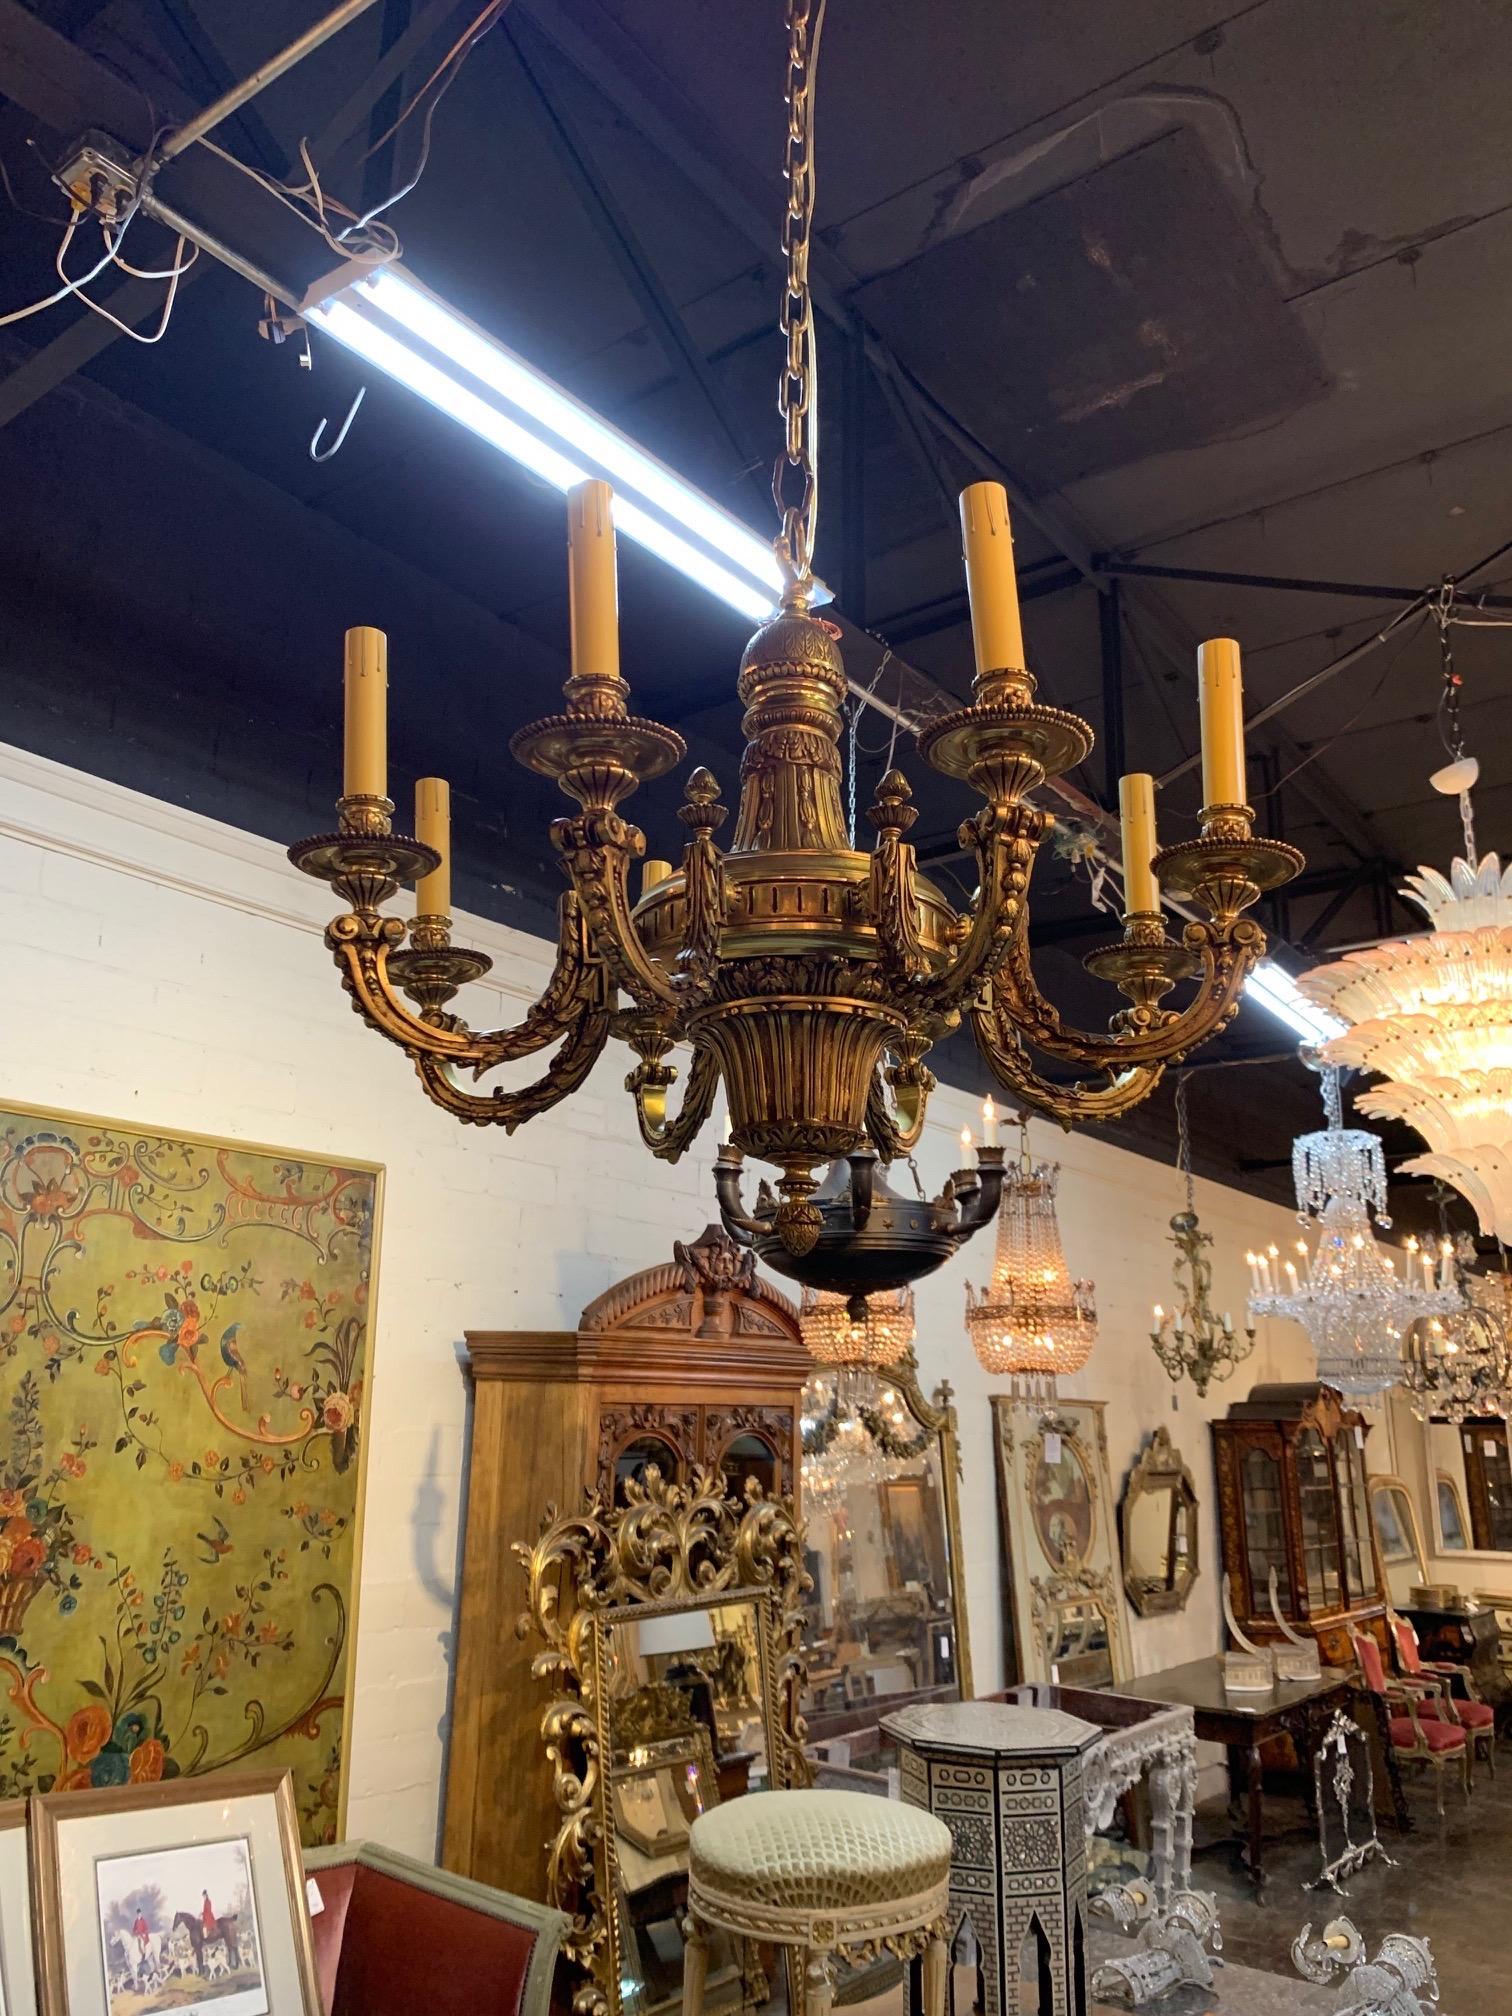 Exceptional 20th century French gilt bronze chandelier with 8-lights. Fabulous decorative details make this fixture stand out. Lovely!